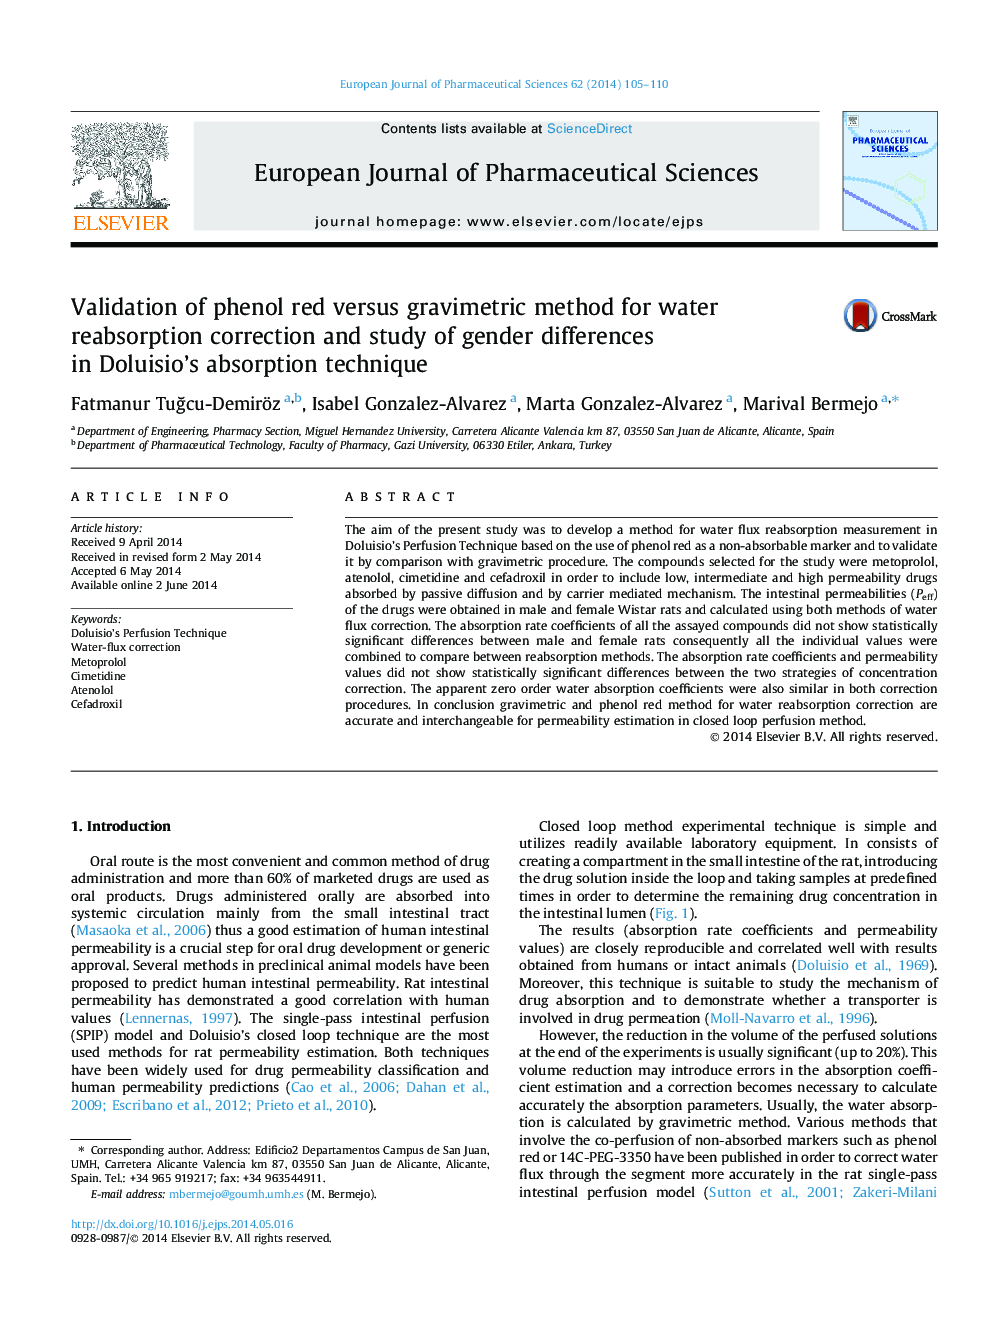 Validation of phenol red versus gravimetric method for water reabsorption correction and study of gender differences in Doluisio’s absorption technique